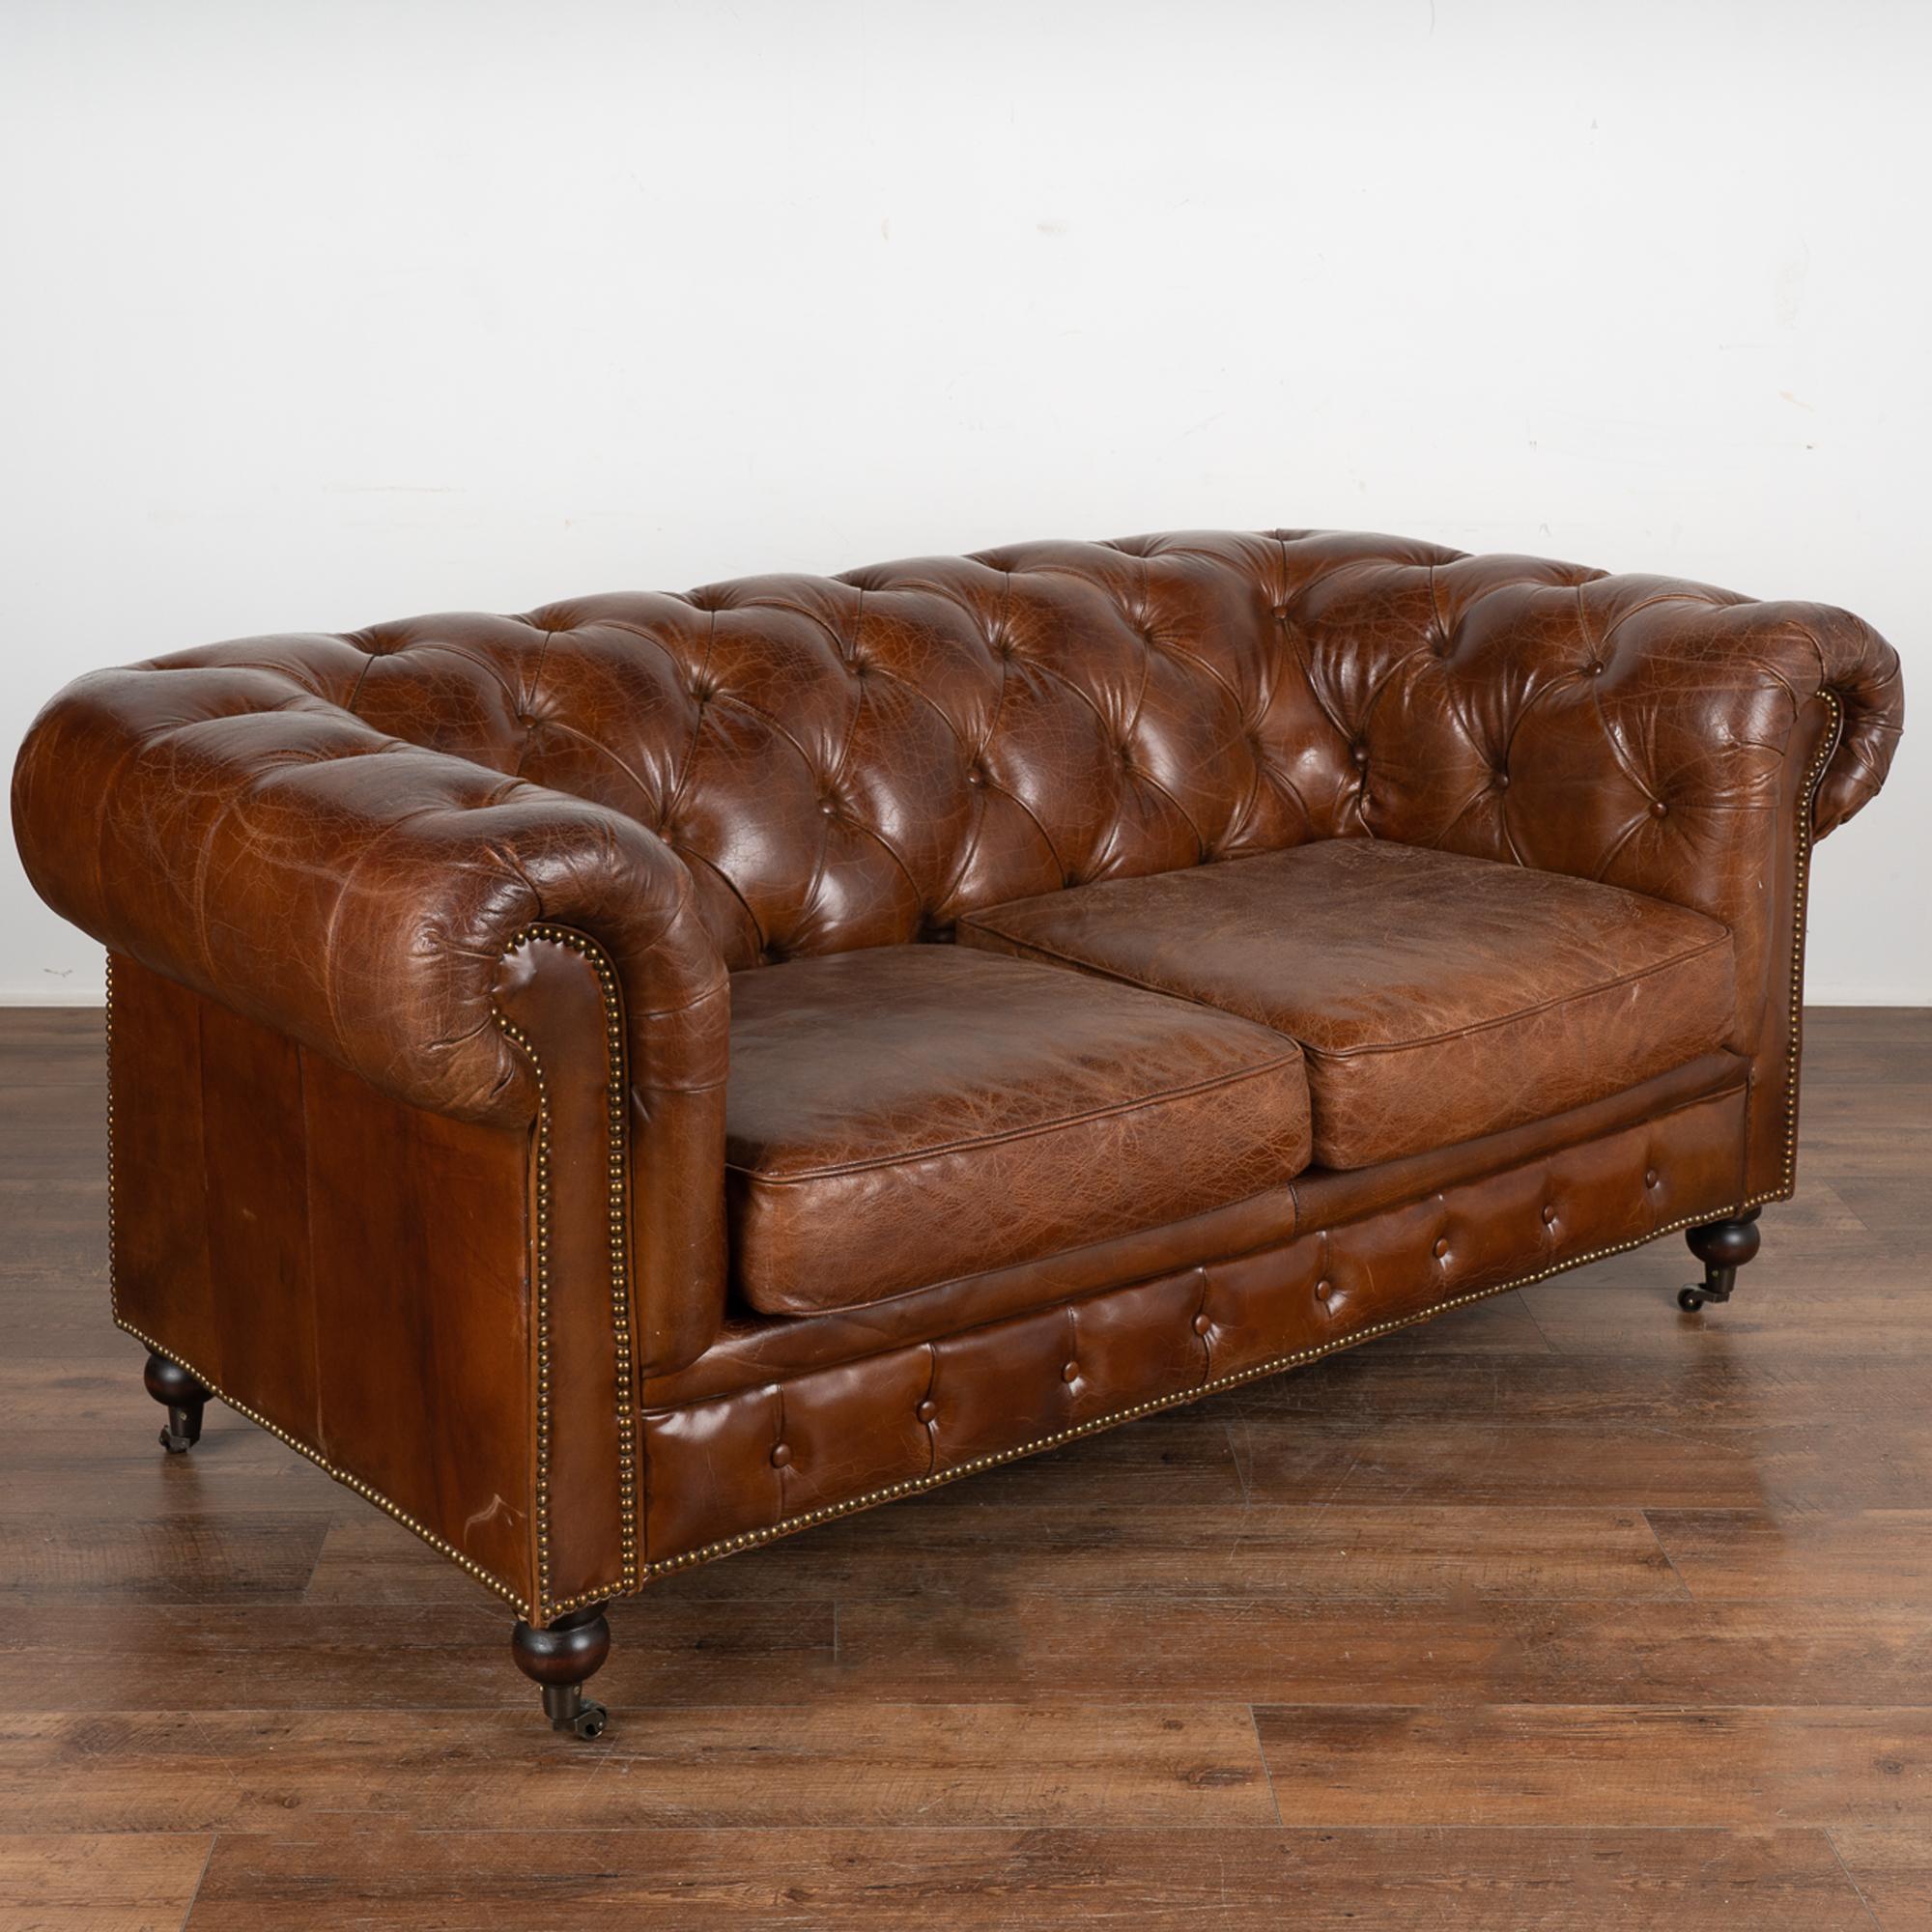 The rich brown vintage leather captures your attention in this wonderful Chesterfield loveseat or 